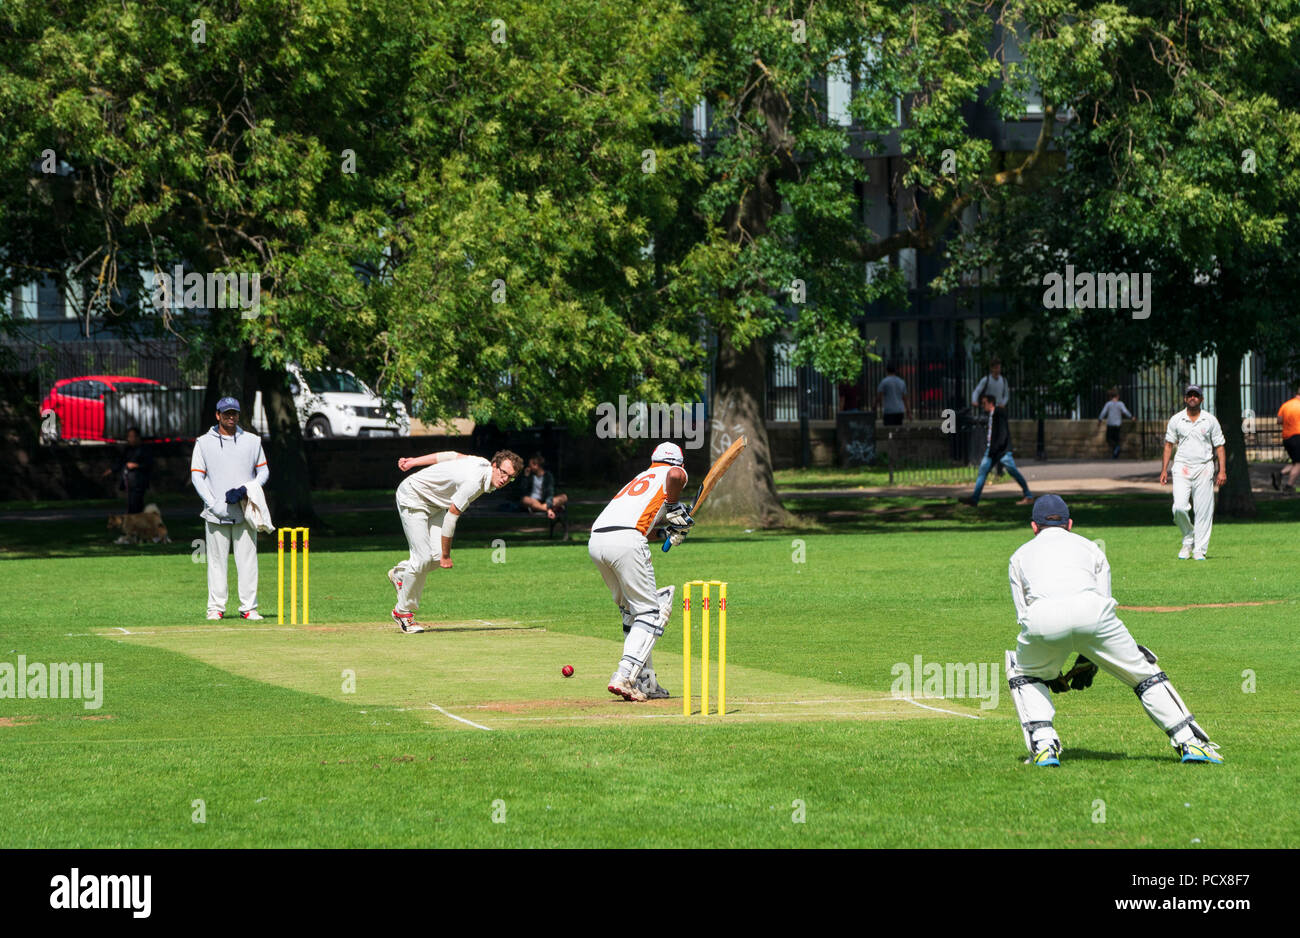 Edinburgh, Scotland, UK; 4 August, 2018. Local derby cricket match between Morton and Marchmont from Edinburgh playing in East of Scotland League Division 1 on the Meadows in Edinburgh. Credit: Iain Masterton/Alamy Live News Stock Photo